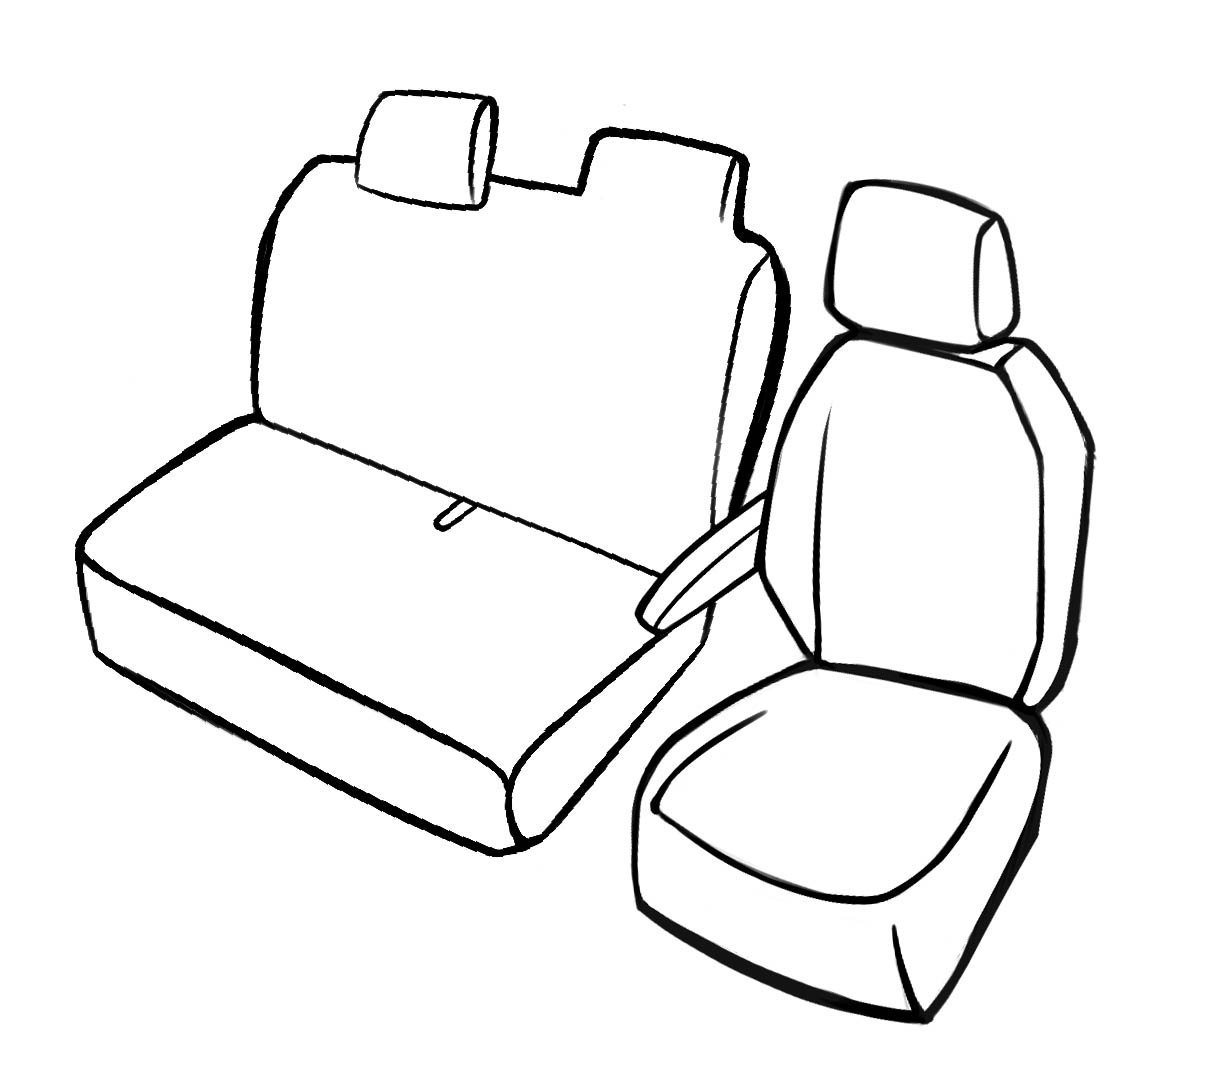 Premium Seat Cover for Mercedes-Benz Sprinter 02/2018-Today, 1 single seat cover front + armrest cover, 1 double bench cover